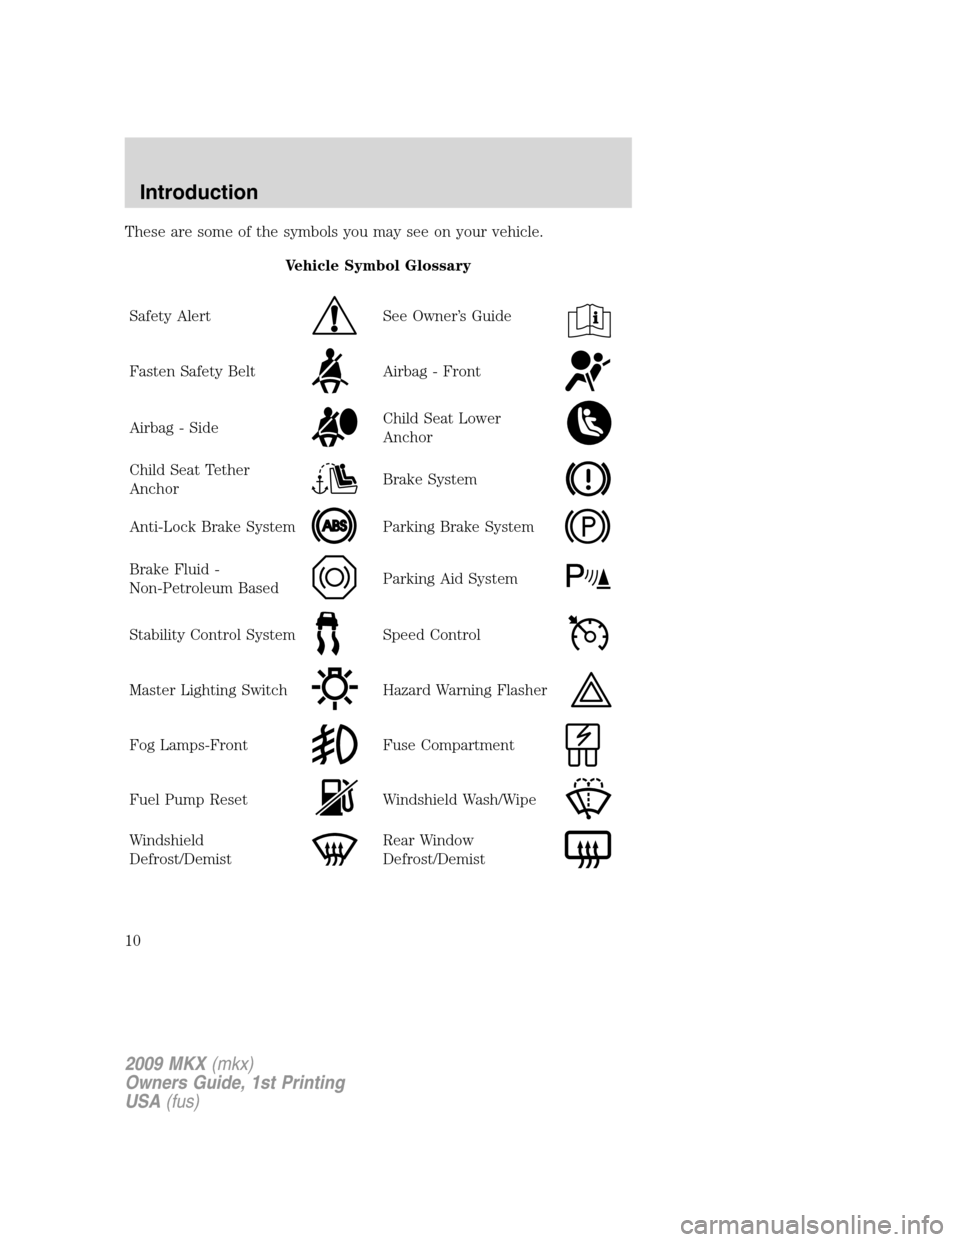 LINCOLN MKX 2009  Owners Manual These are some of the symbols you may see on your vehicle.
Vehicle Symbol Glossary
Safety Alert
See Owner’s Guide
Fasten Safety BeltAirbag - Front
Airbag - SideChild Seat Lower
Anchor
Child Seat Tet